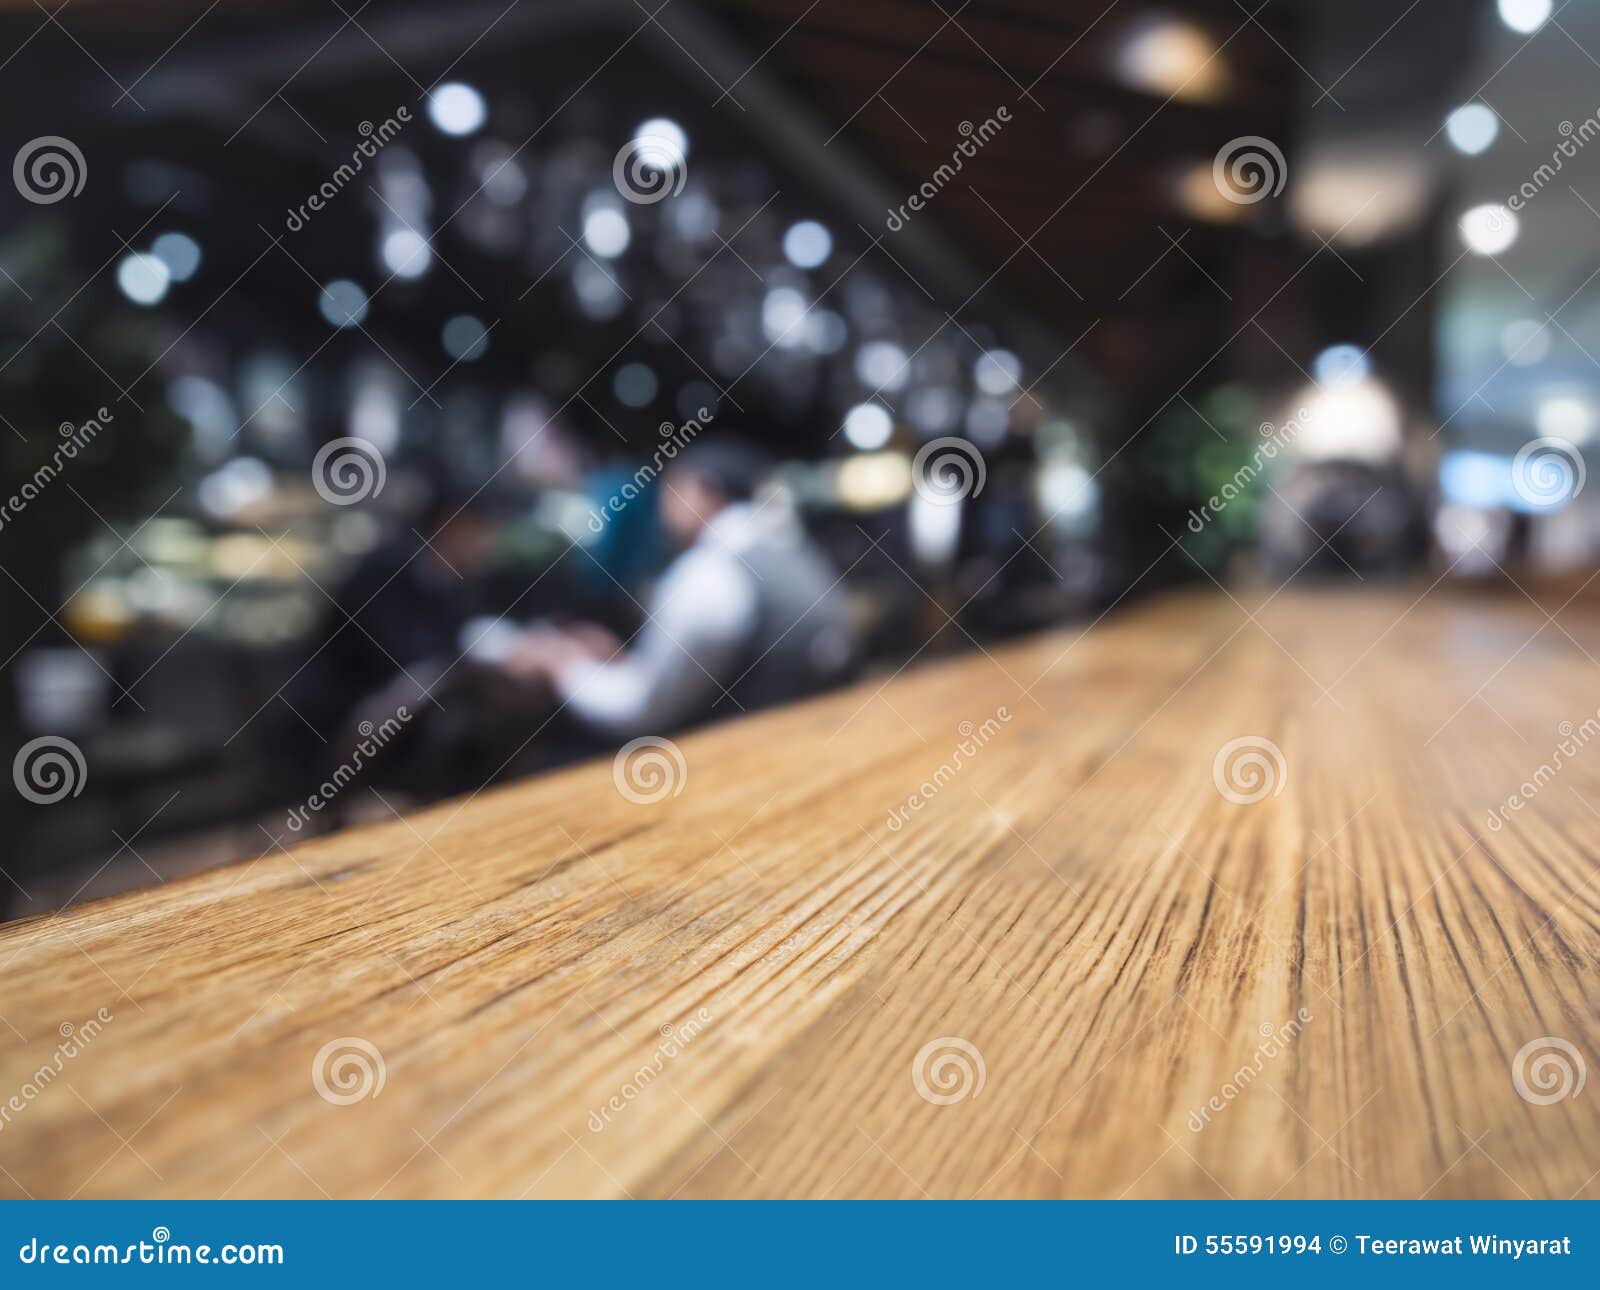 Table Top Counter Bar Restaurant Background With Bartender Stock Photo  55591994 - Megapixl